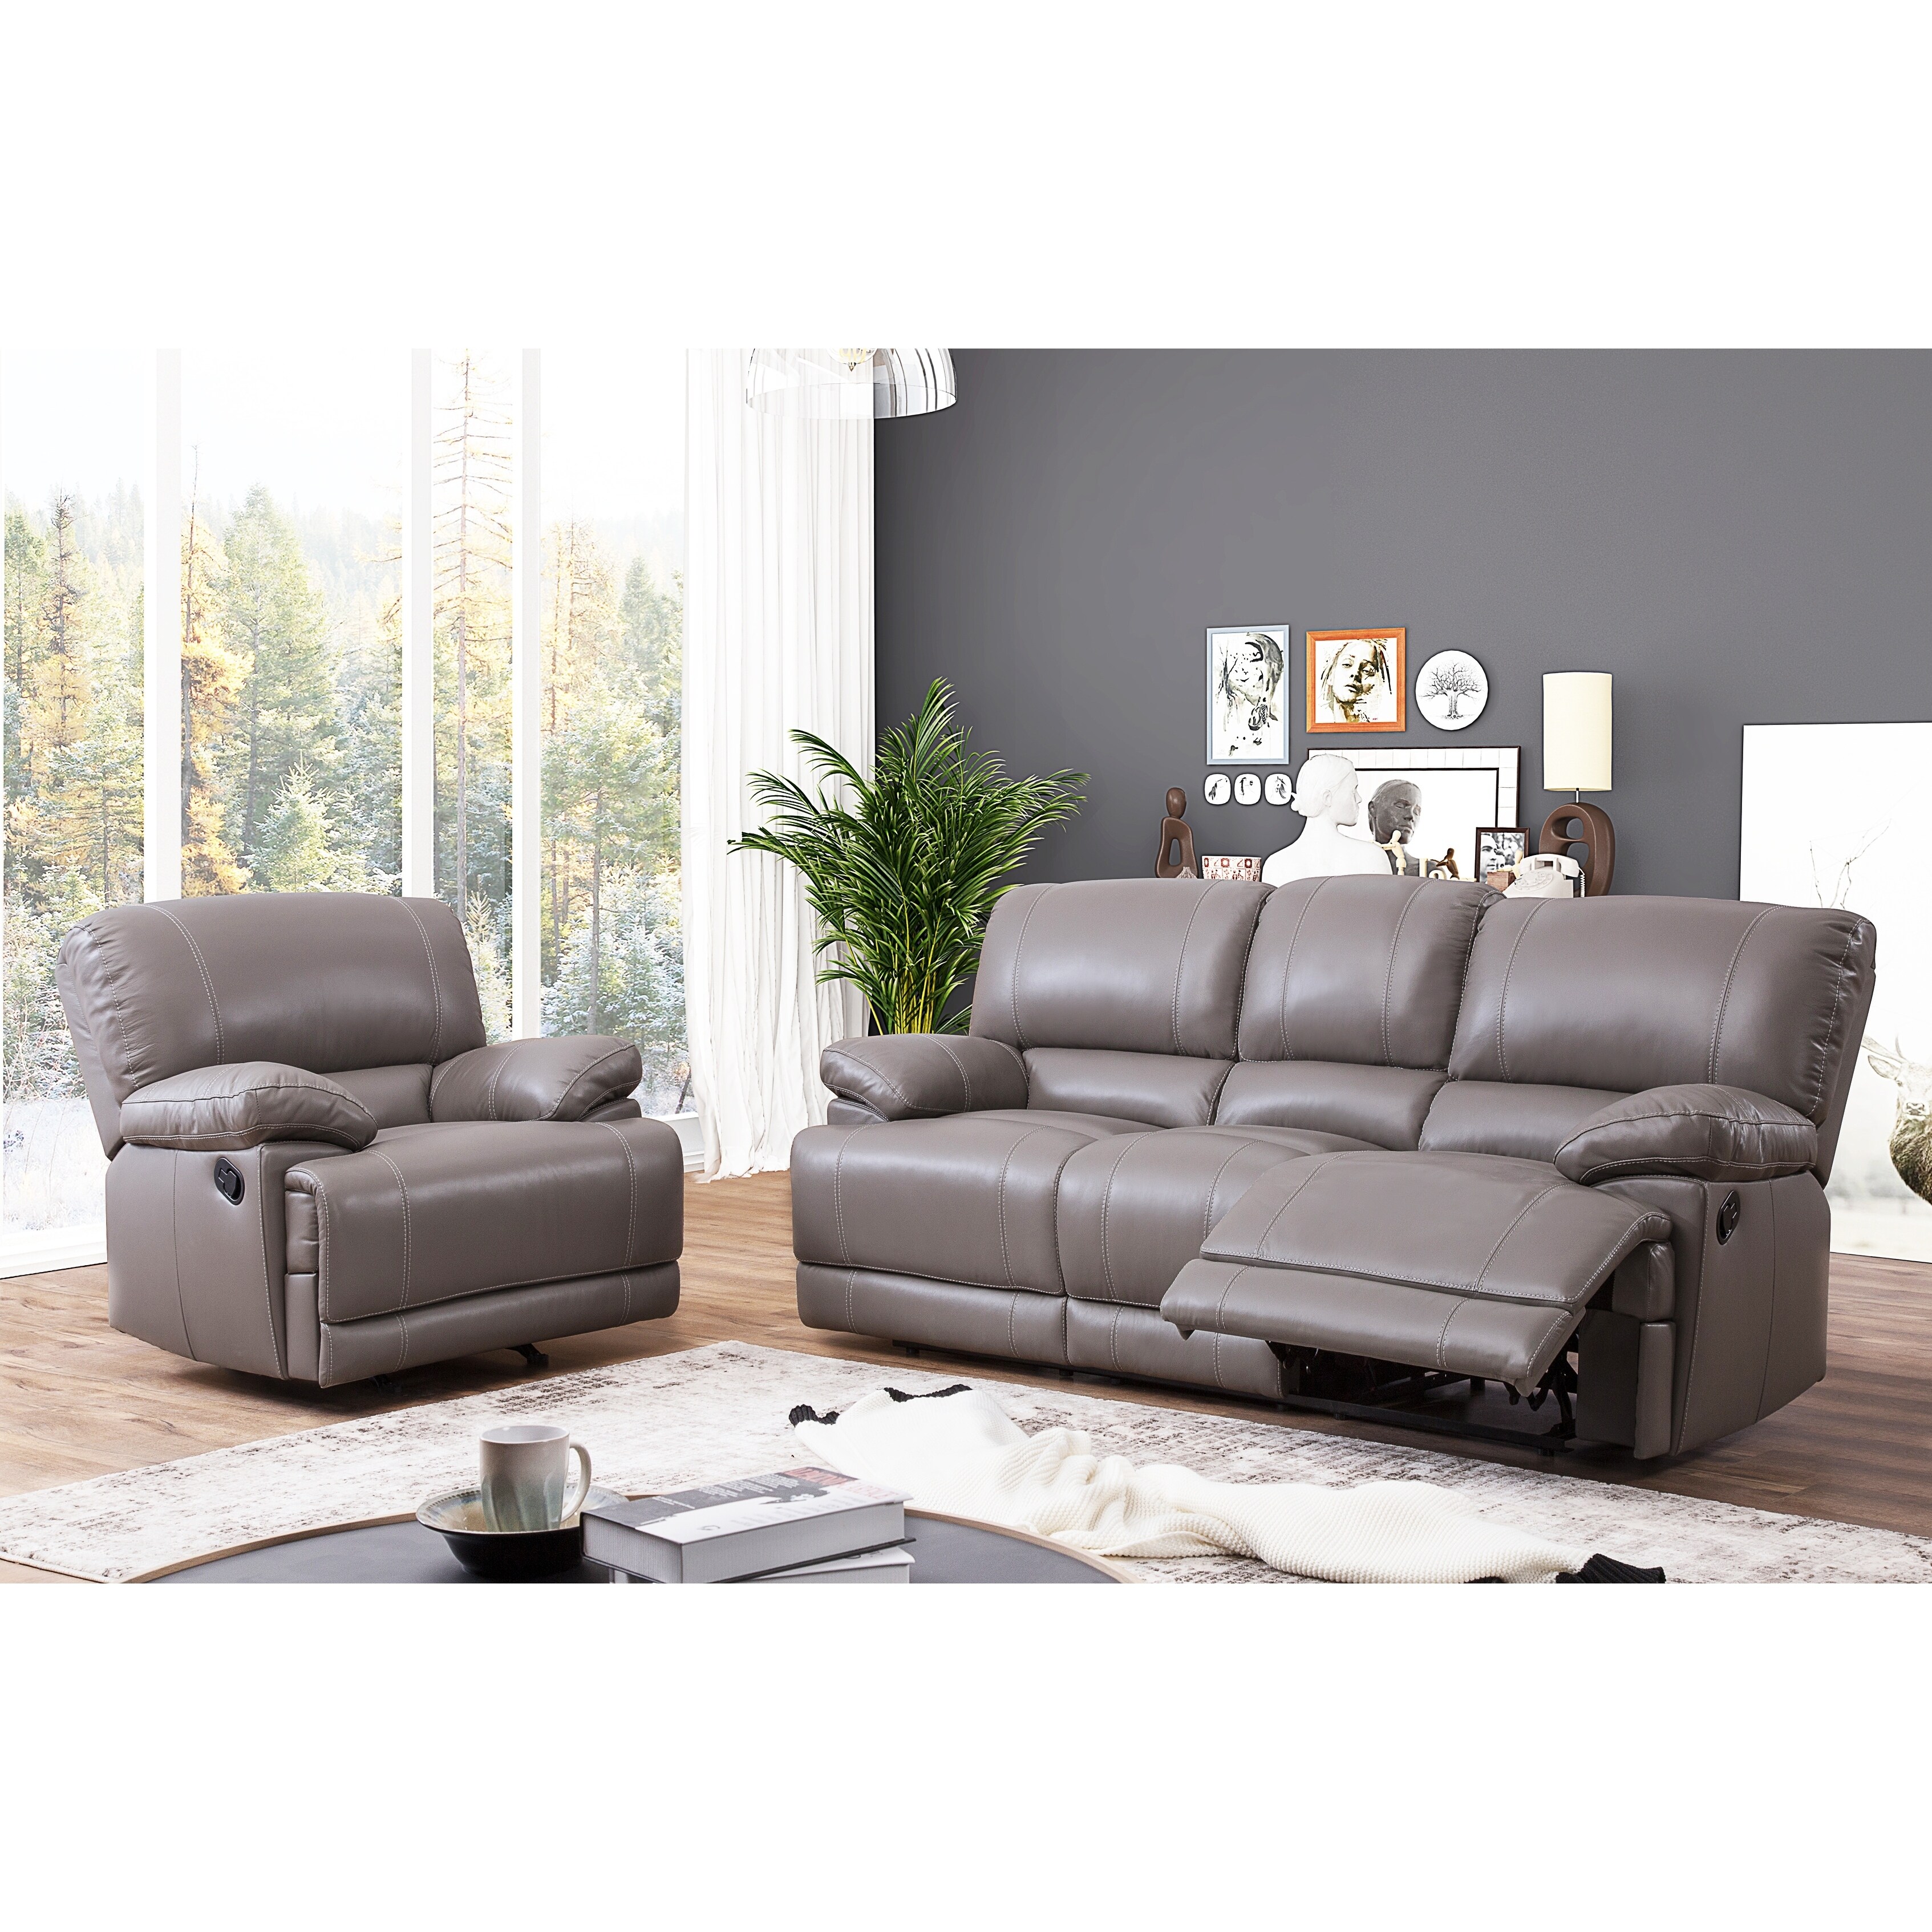 Abbyson Remmy Grey Top Grain Leather Reclining 2 Piece Living Room Set